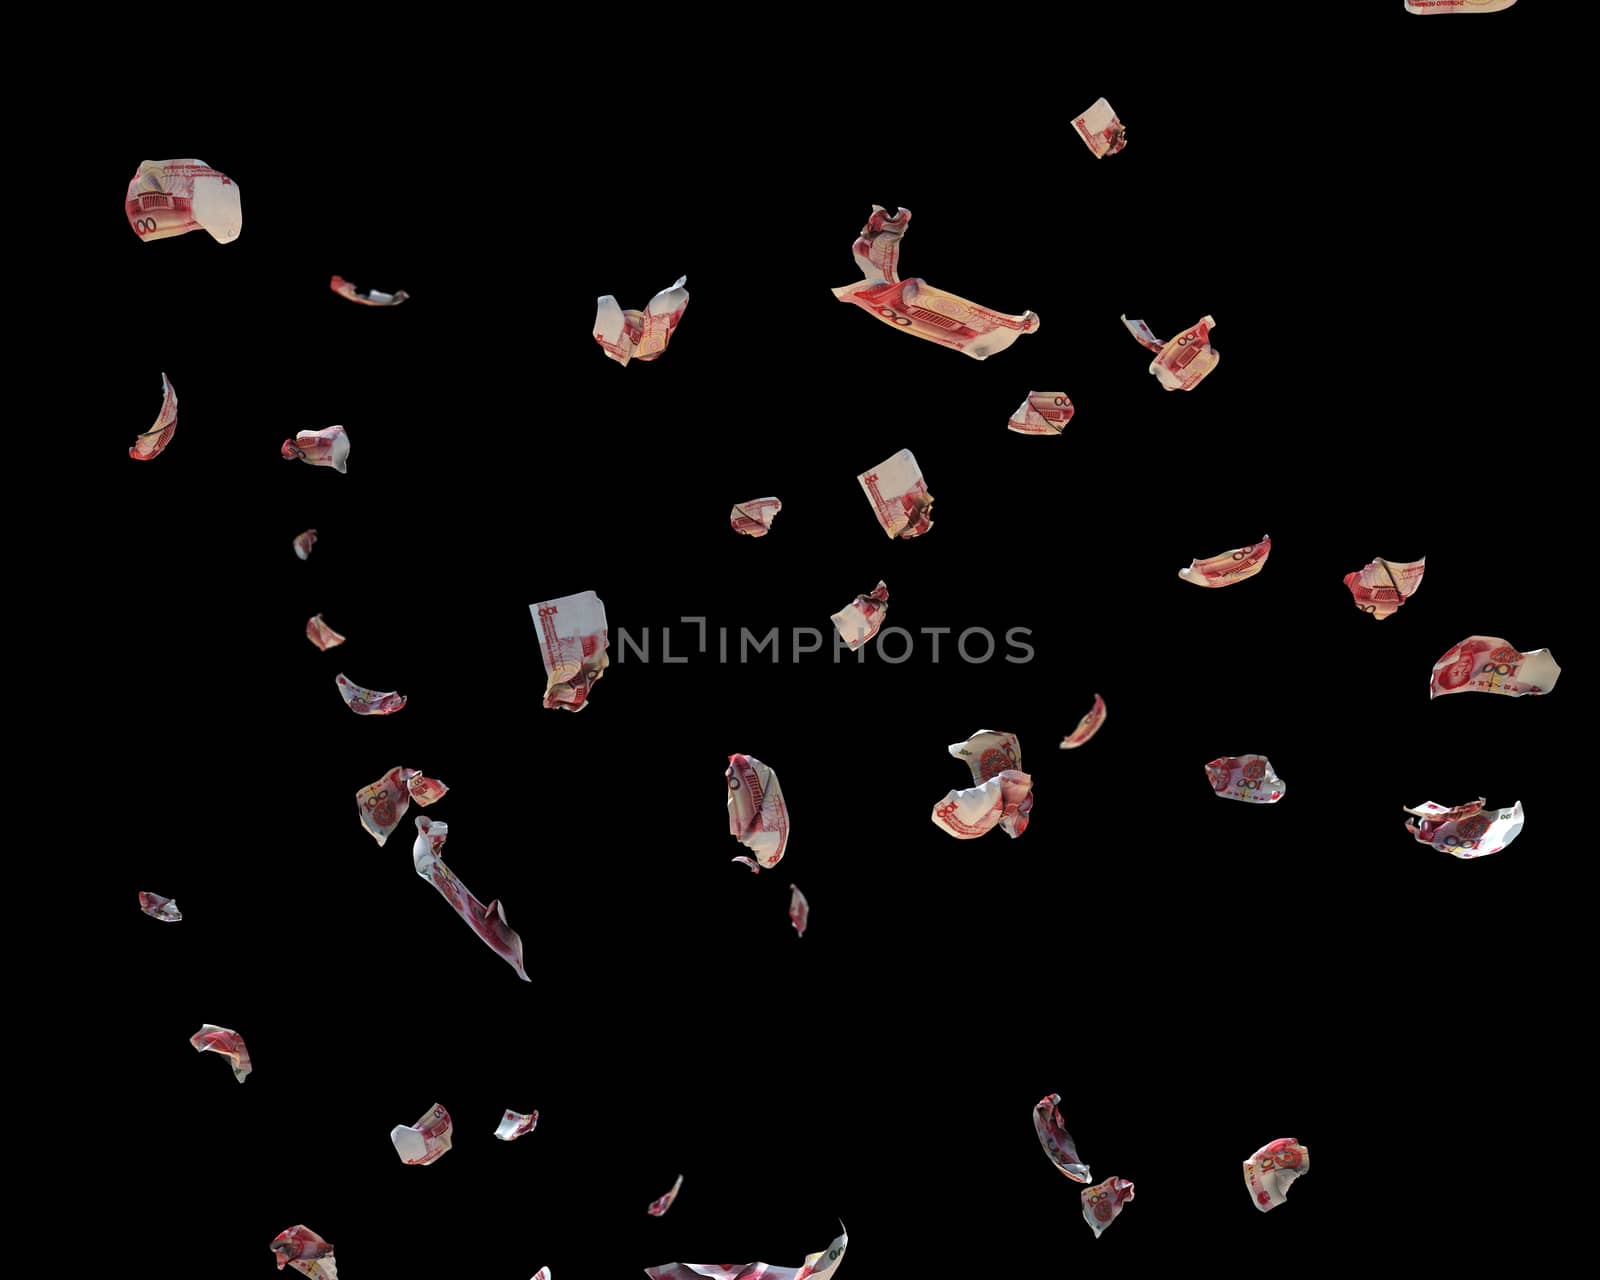 100 Chinese Yuan Currency Crumpled Banknotes flying, against black, clipping path included